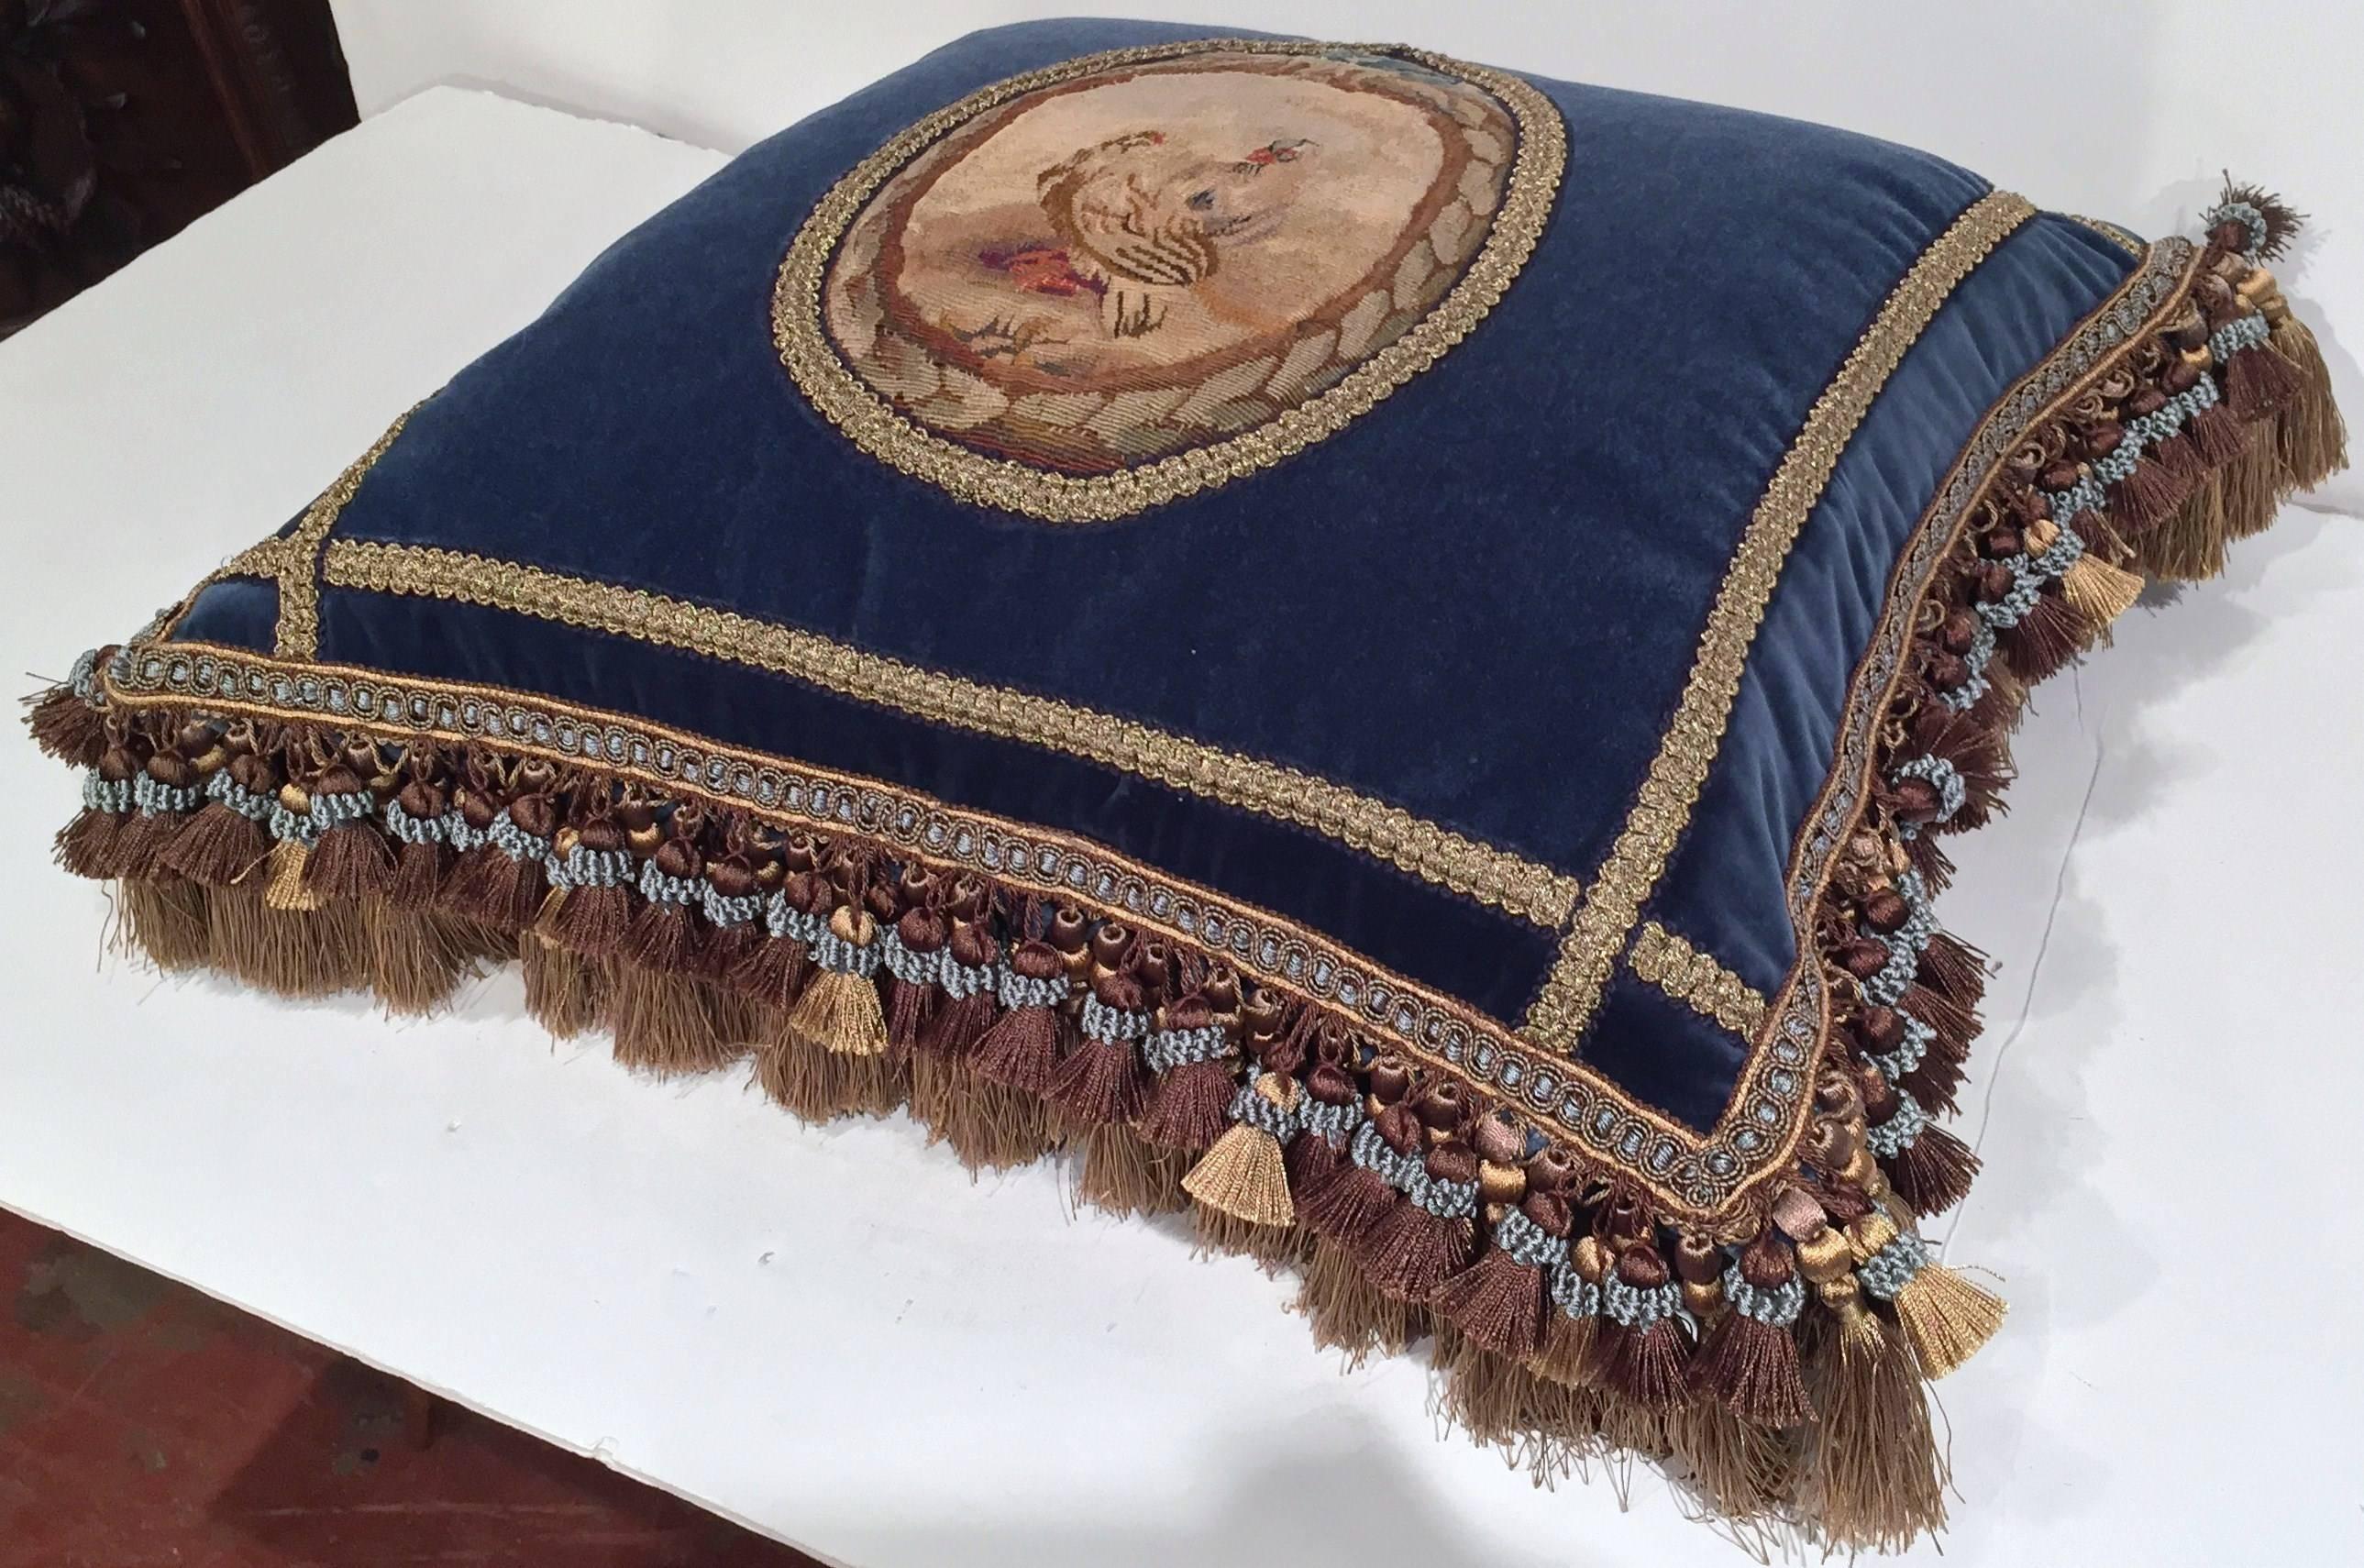 Hand-Crafted Handmade French Pillow with 18th Century Aubusson Tapestry, Trims and Tassels